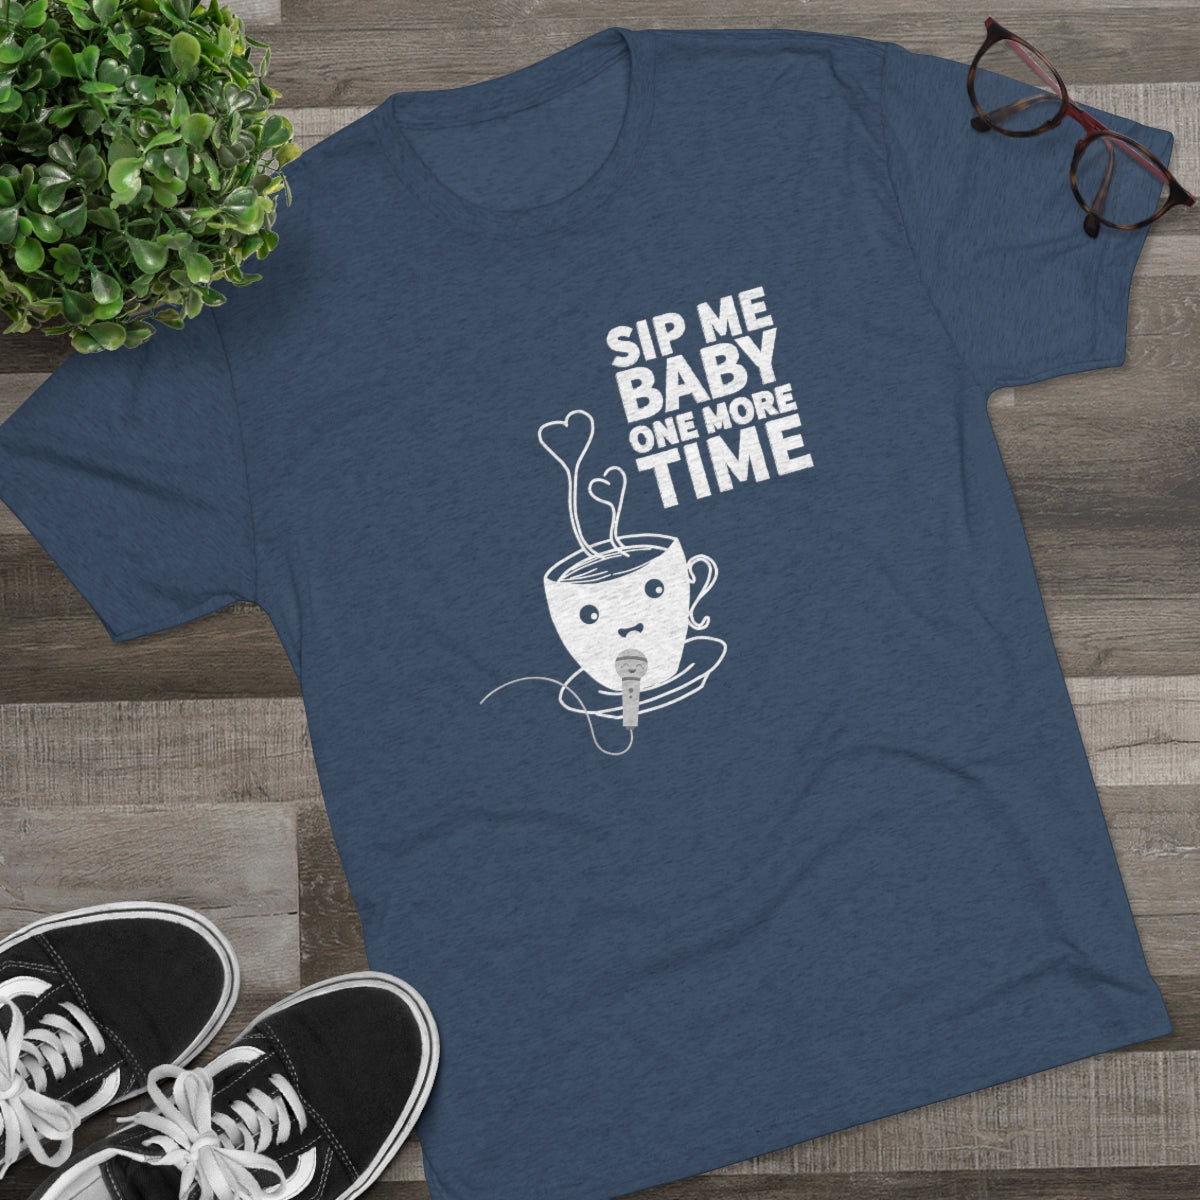 Sip Me Baby Graphic Tee -   - Harney & Sons Fine Teas